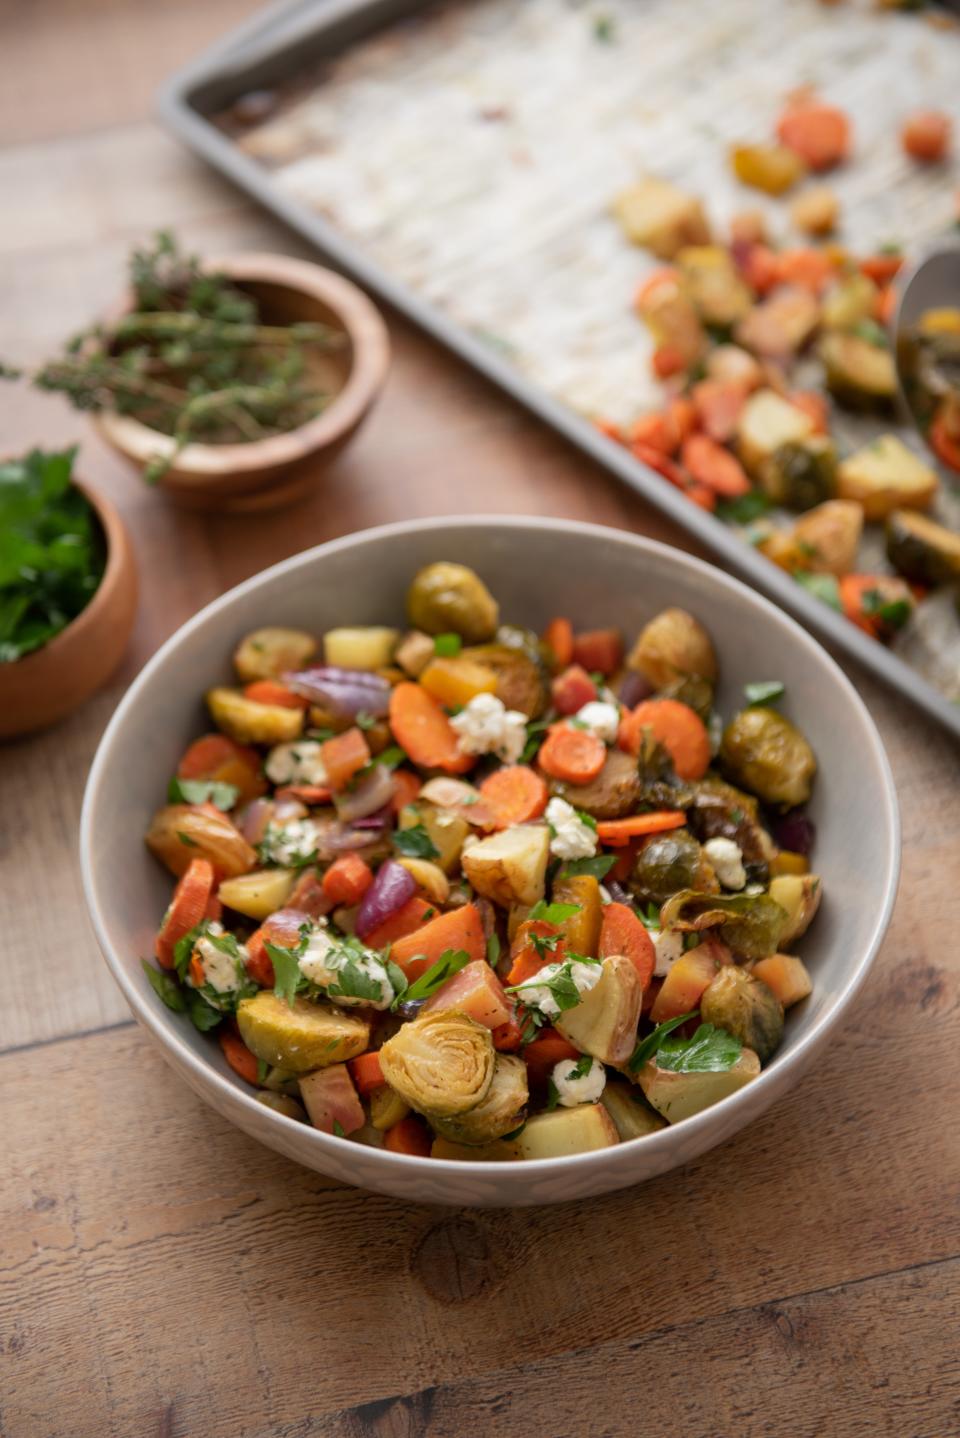 Maple Roasted Vegetables are a blend of sweet and savory.